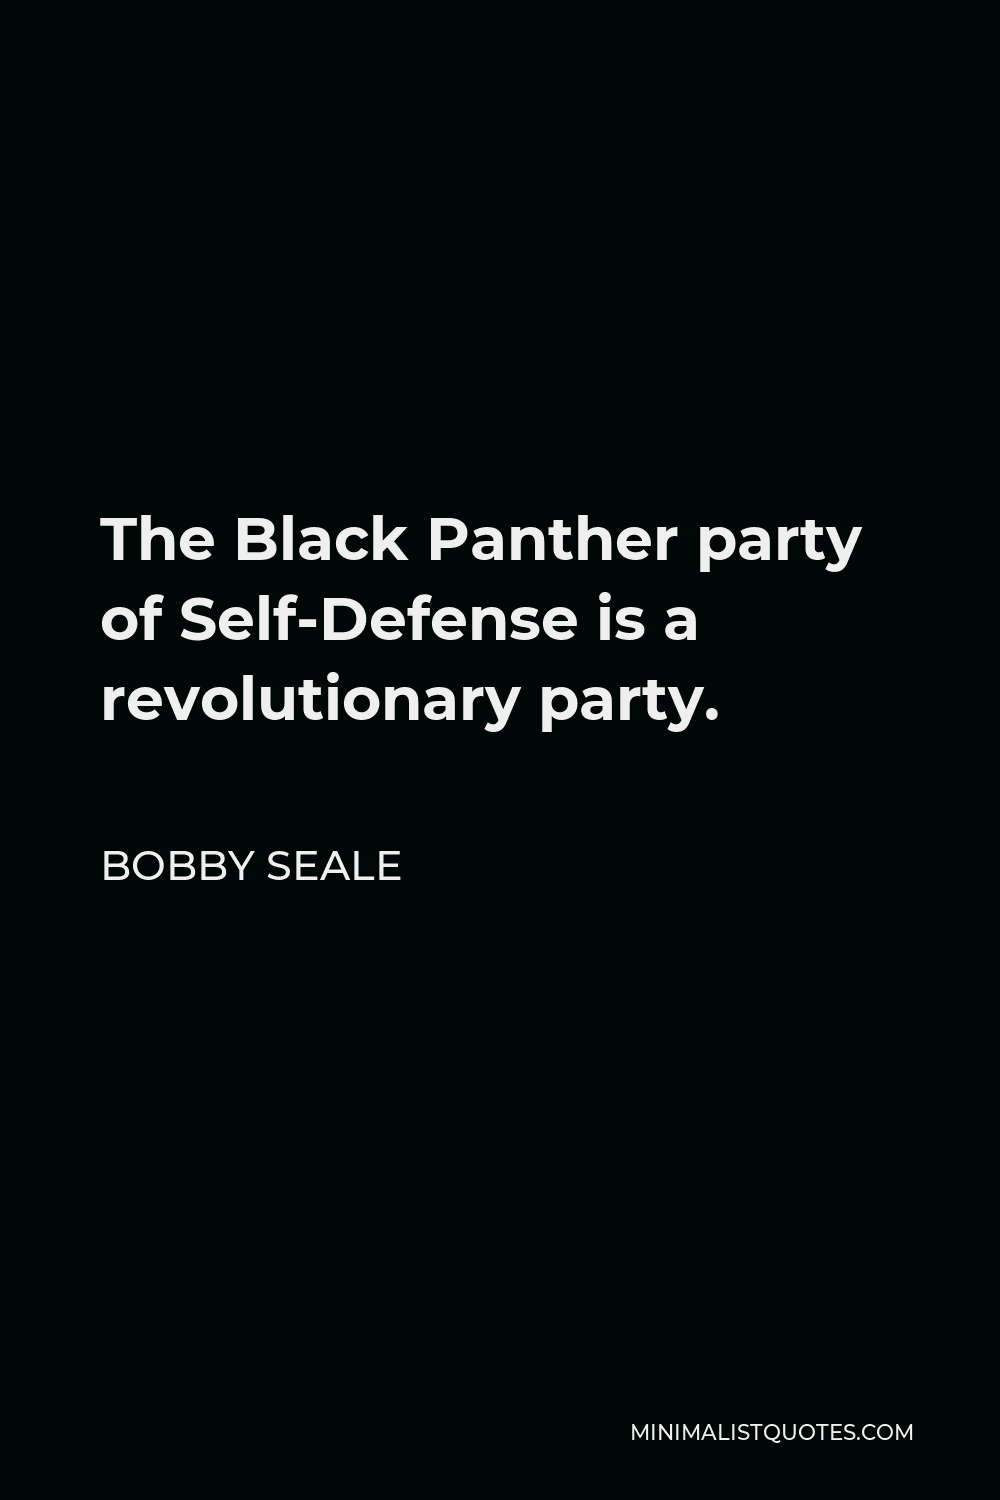 Bobby Seale Quote - The Black Panther party of Self-Defense is a revolutionary party.